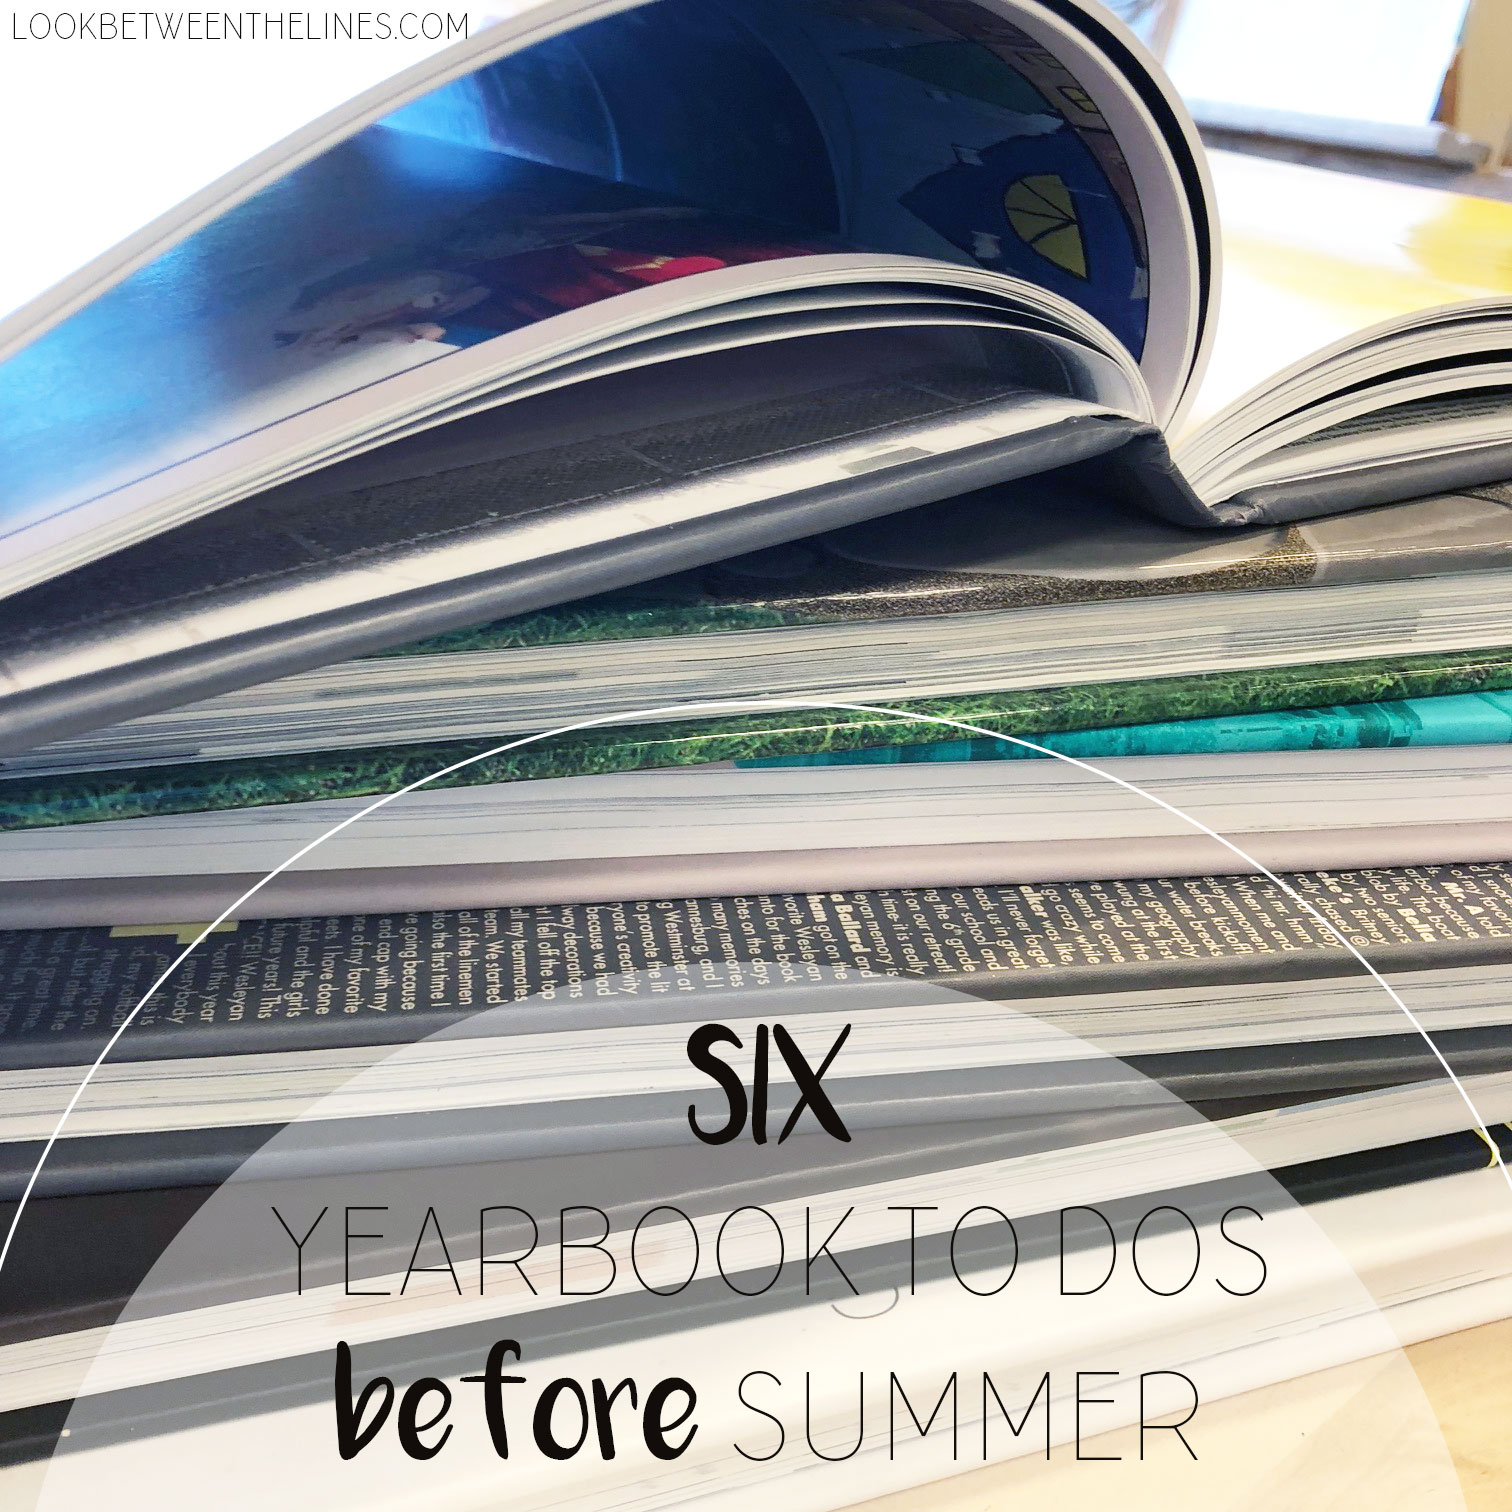 Yearbook adviser to do list before summer